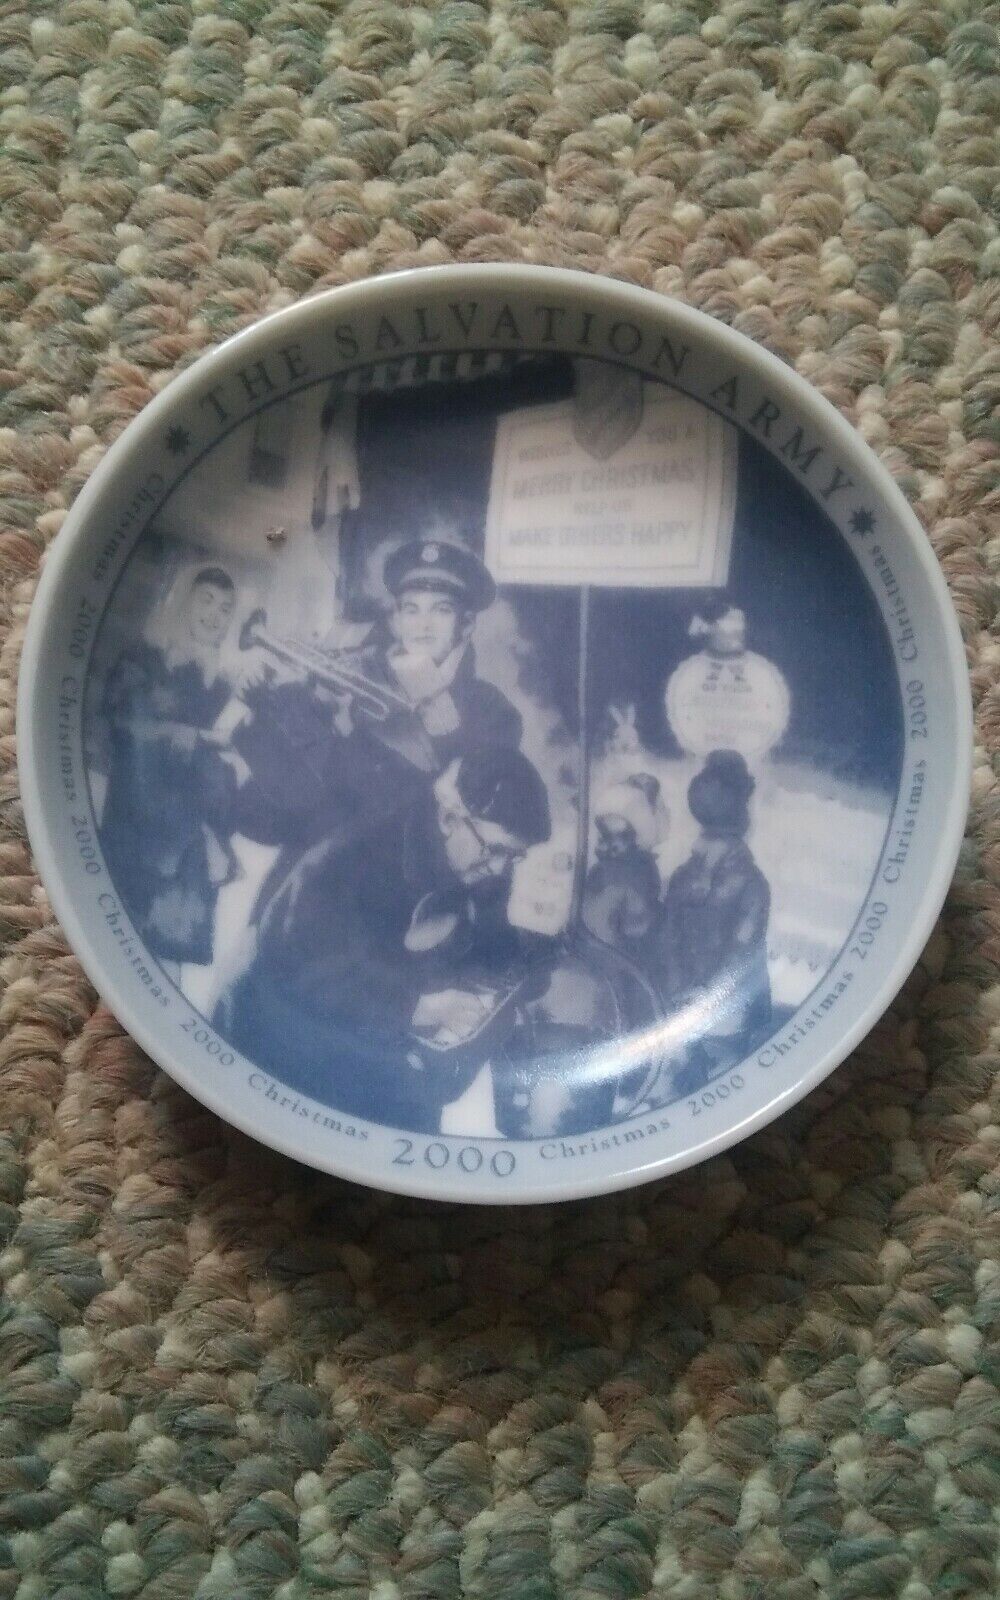 005 Salvation Army "christmas 2000" Commemorative Plate Art 3.5 Inch